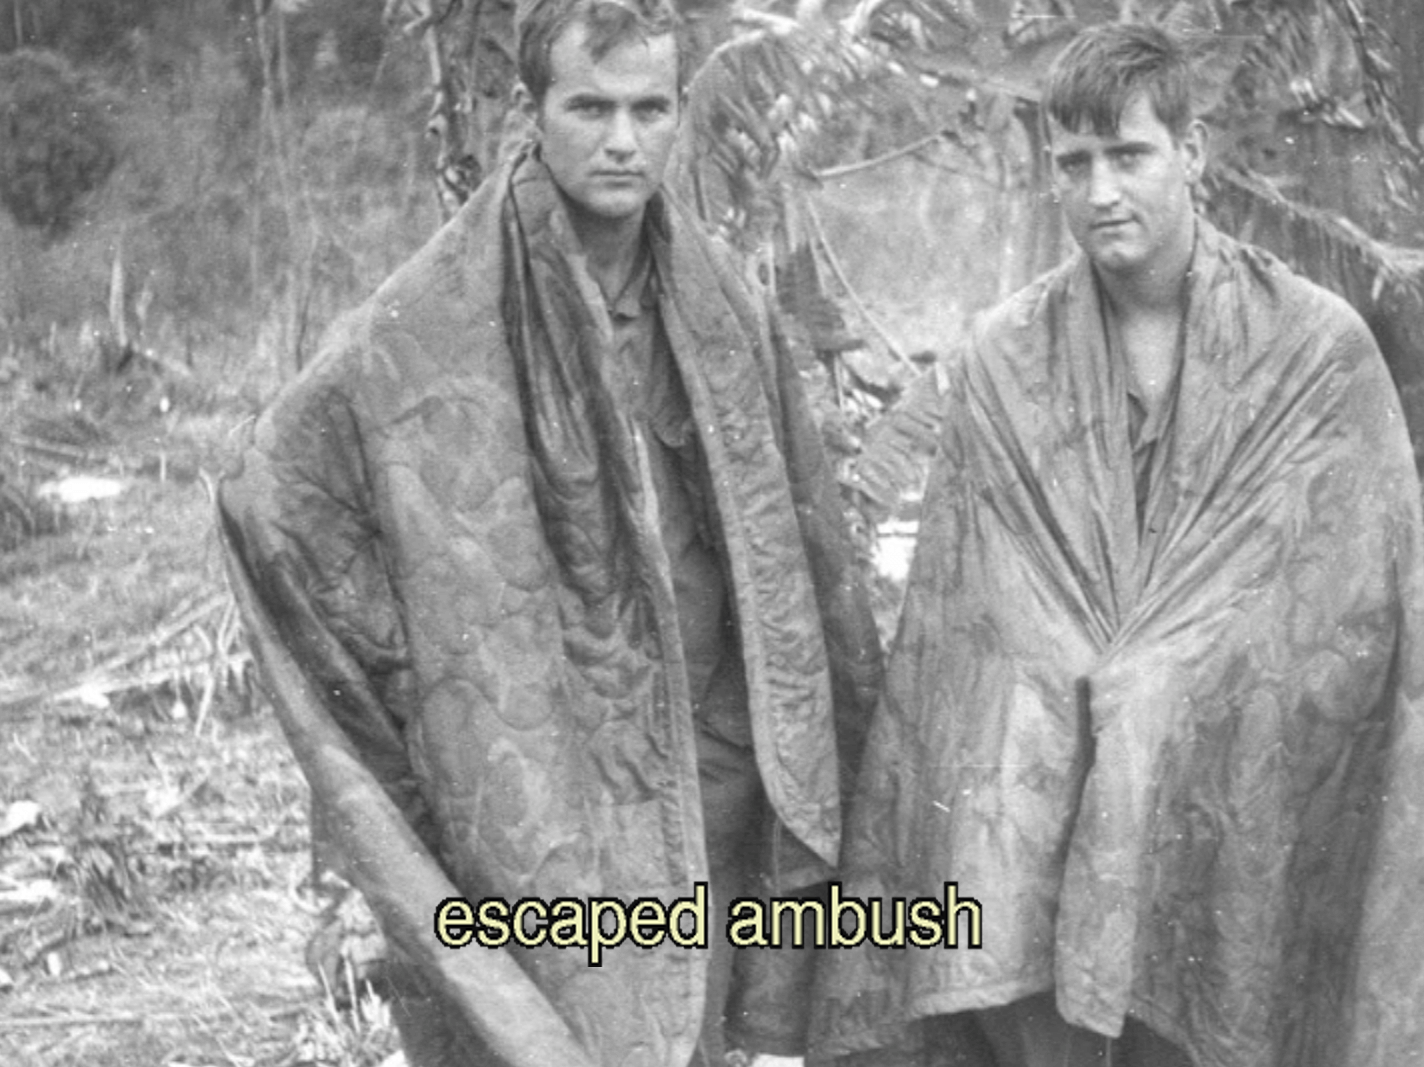 Two stern-looking soldiers wrapped in blankets. Text on photo says "escaped ambush."